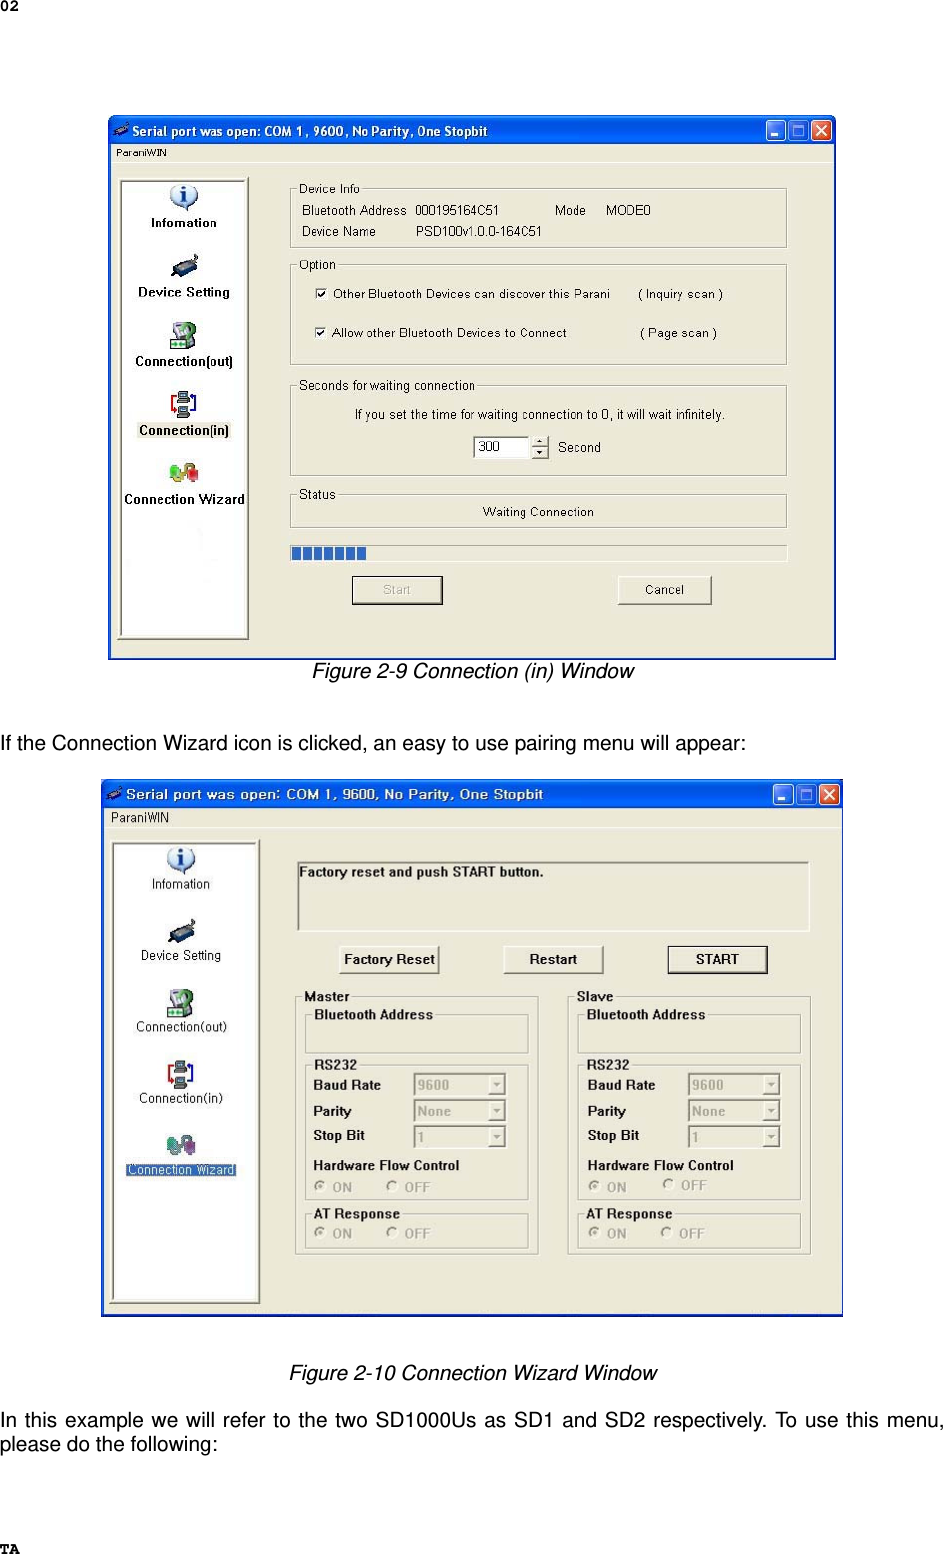 02 TA  Figure 2-9 Connection (in) Window   If the Connection Wizard icon is clicked, an easy to use pairing menu will appear:    Figure 2-10 Connection Wizard Window  In this example we will refer to the two SD1000Us as SD1 and SD2 respectively. To use this menu, please do the following:    